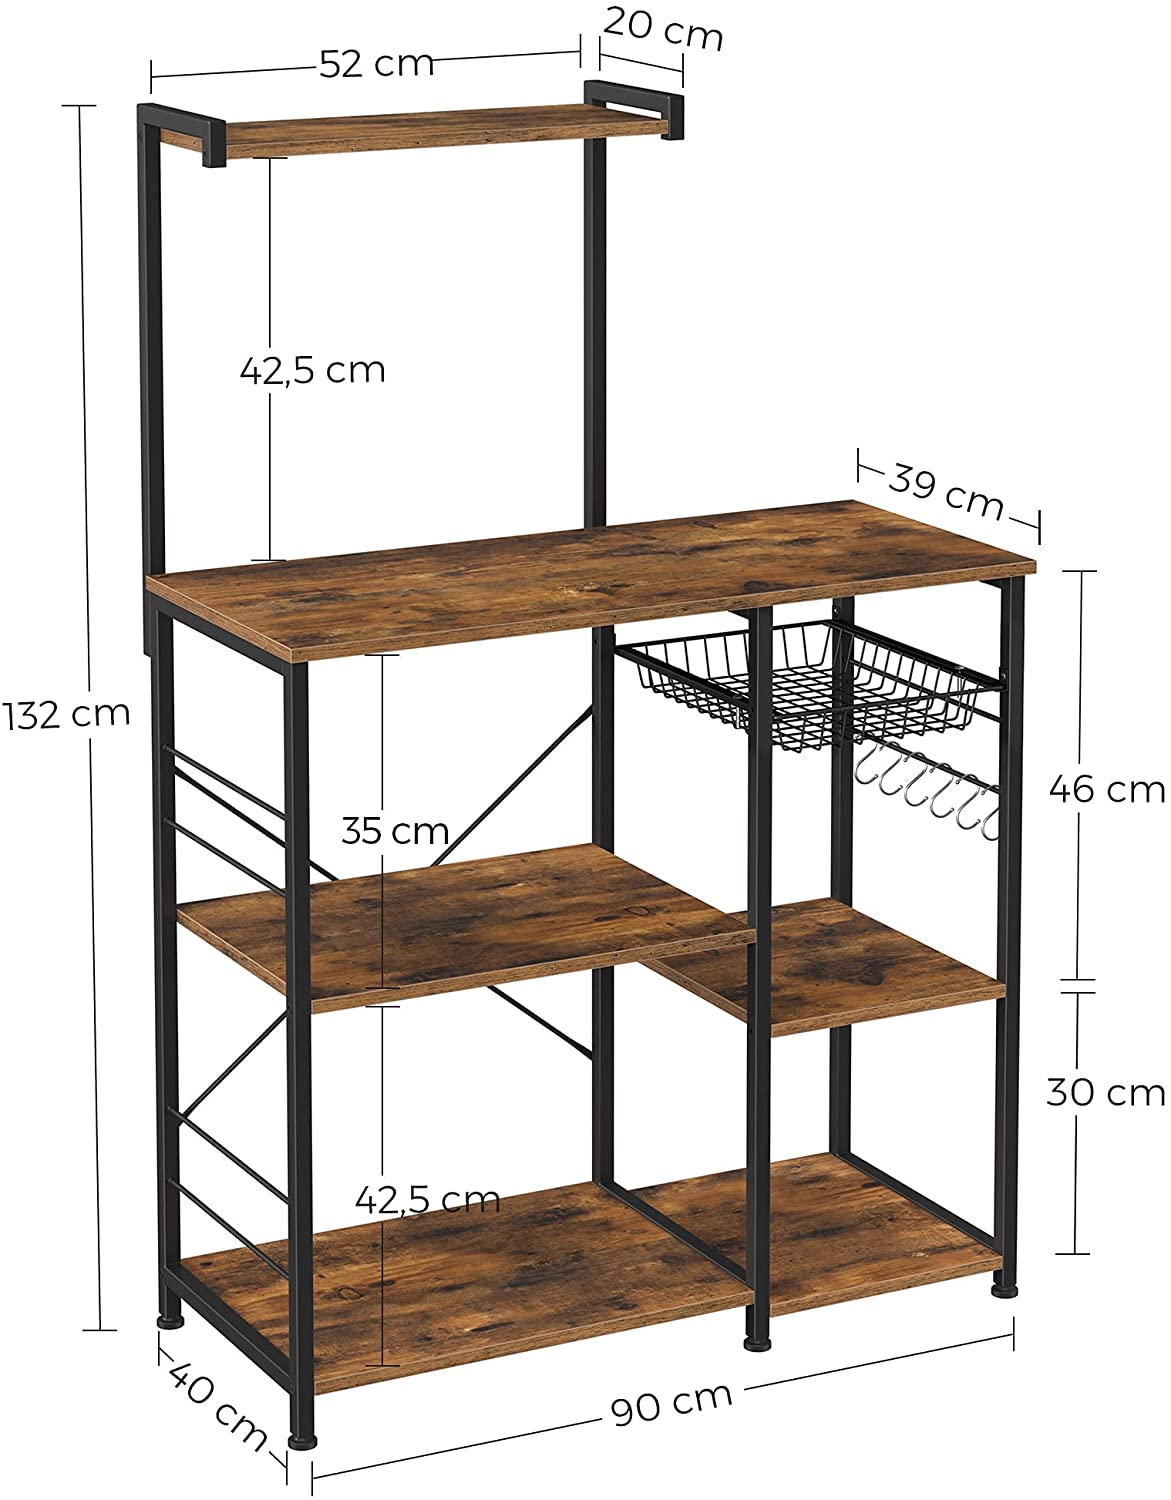 Kithcen Baker's Rack with Shelves Microwave Stand with Wire Basket and 6 S-Hooks Rustic Brown